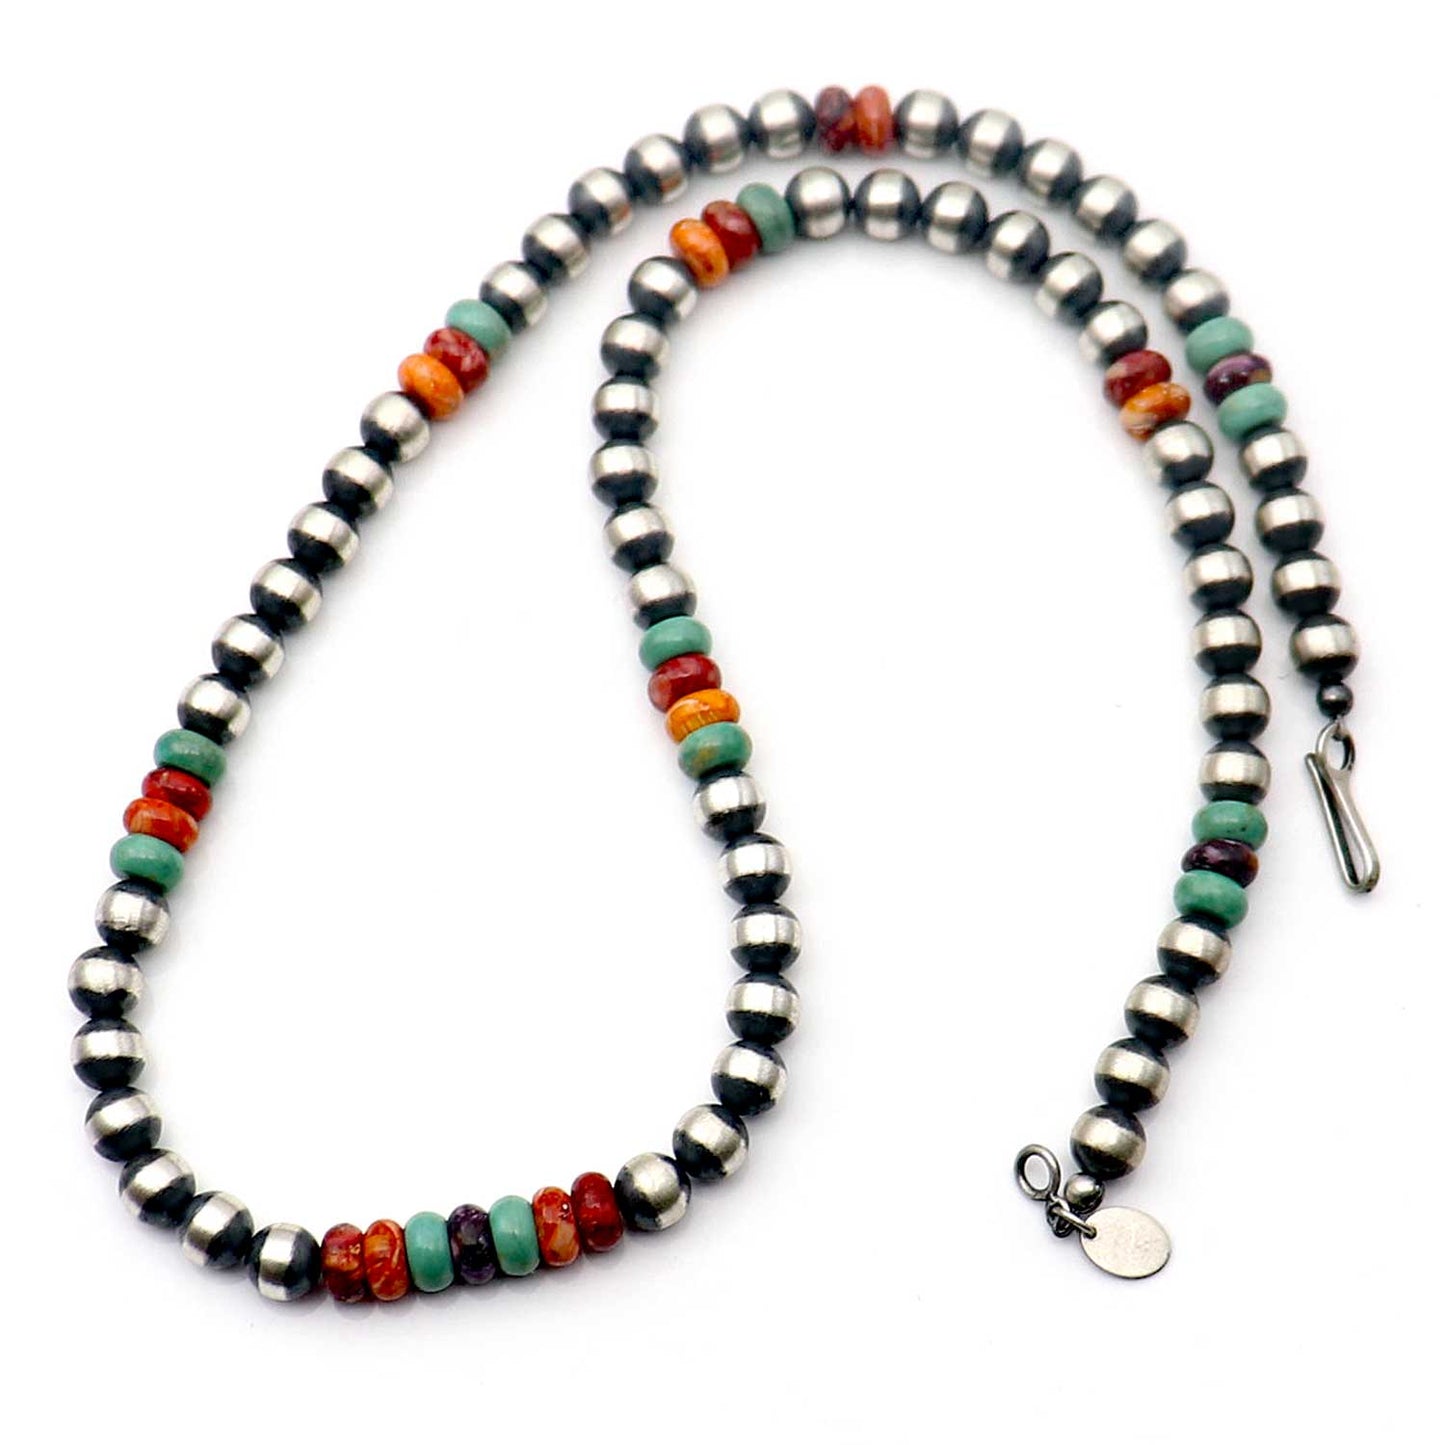 18" 6 mm Sterling Silver Navaho Pearls With Accent Beads